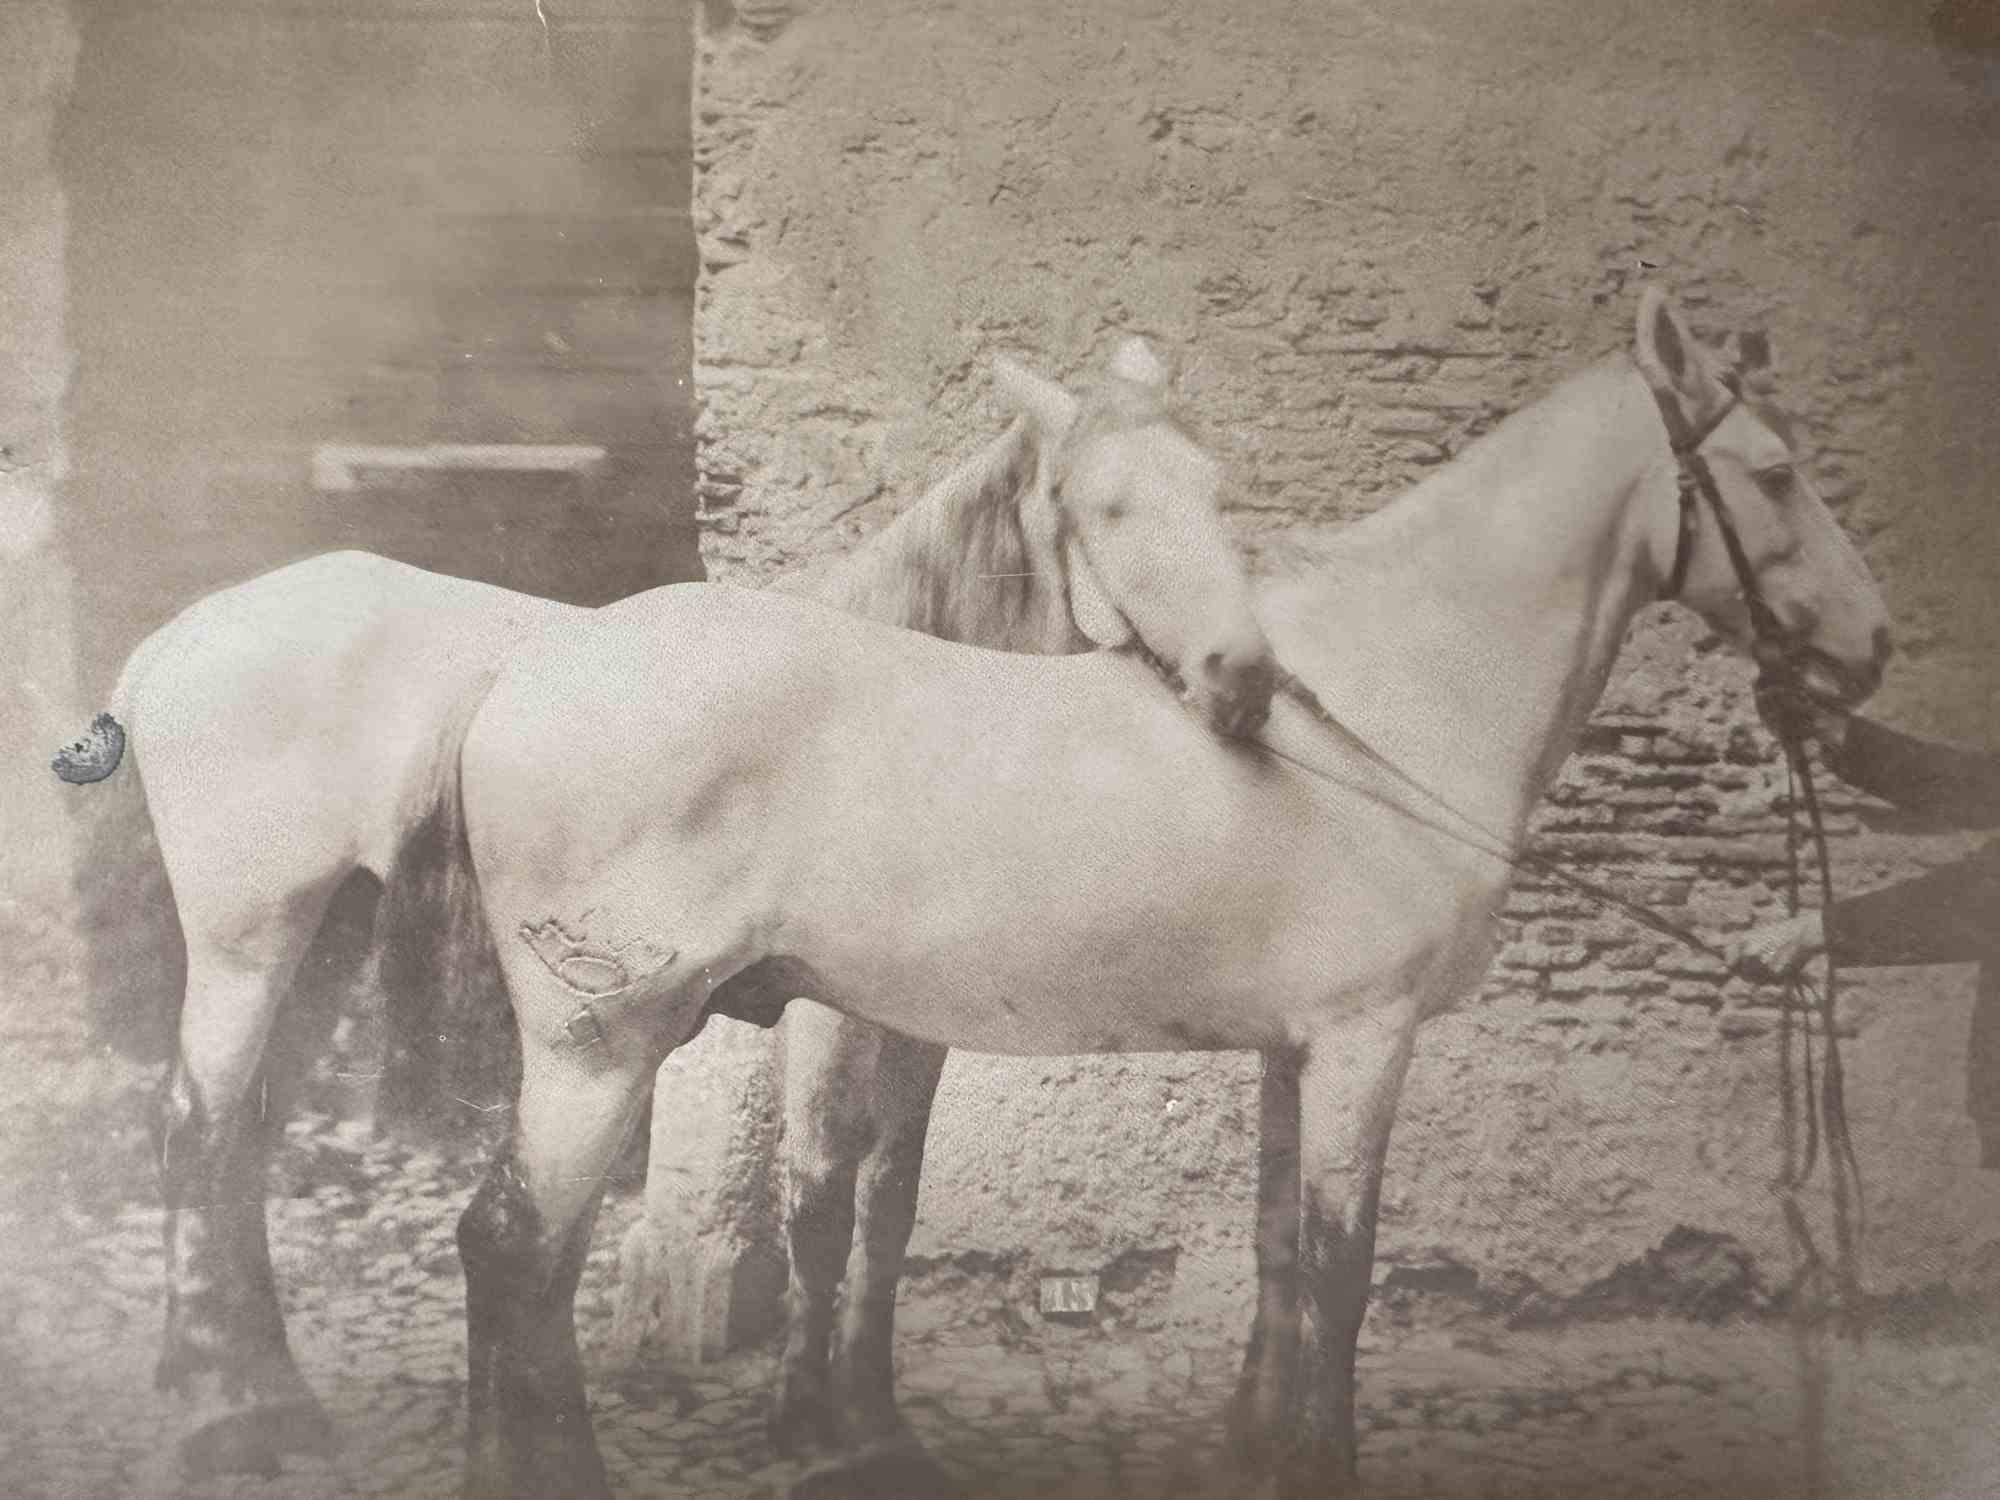 Unknown Figurative Photograph - Historical Photo - Horses - Vintage Photo - Early 20th Century